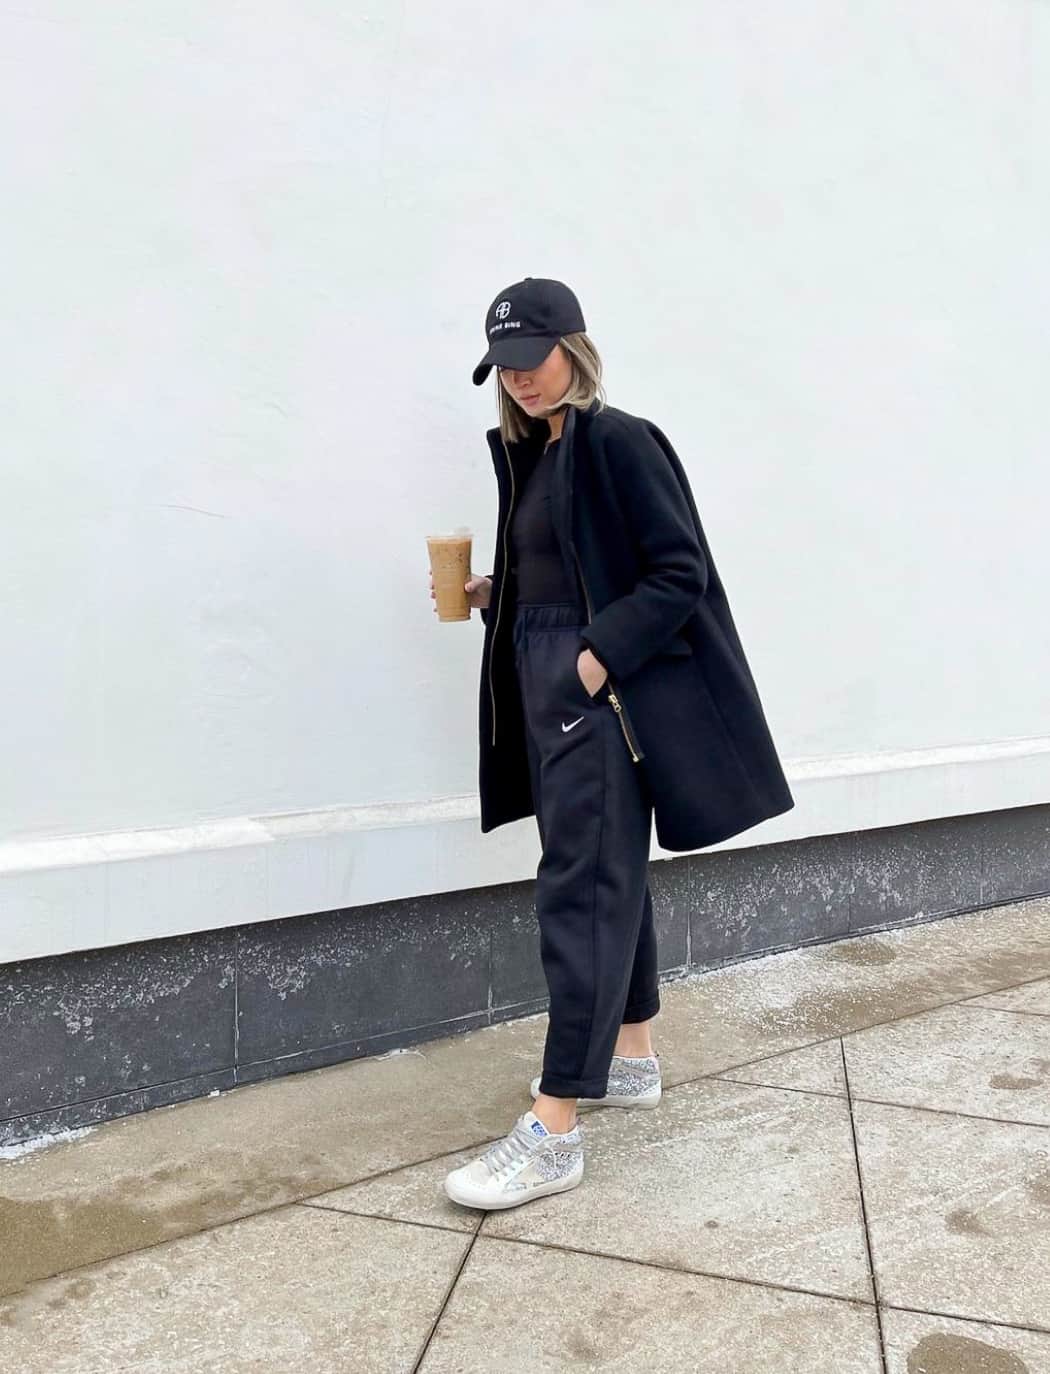 Woman wearing a black hat, jacket, and pants with Golden Goose sneakers